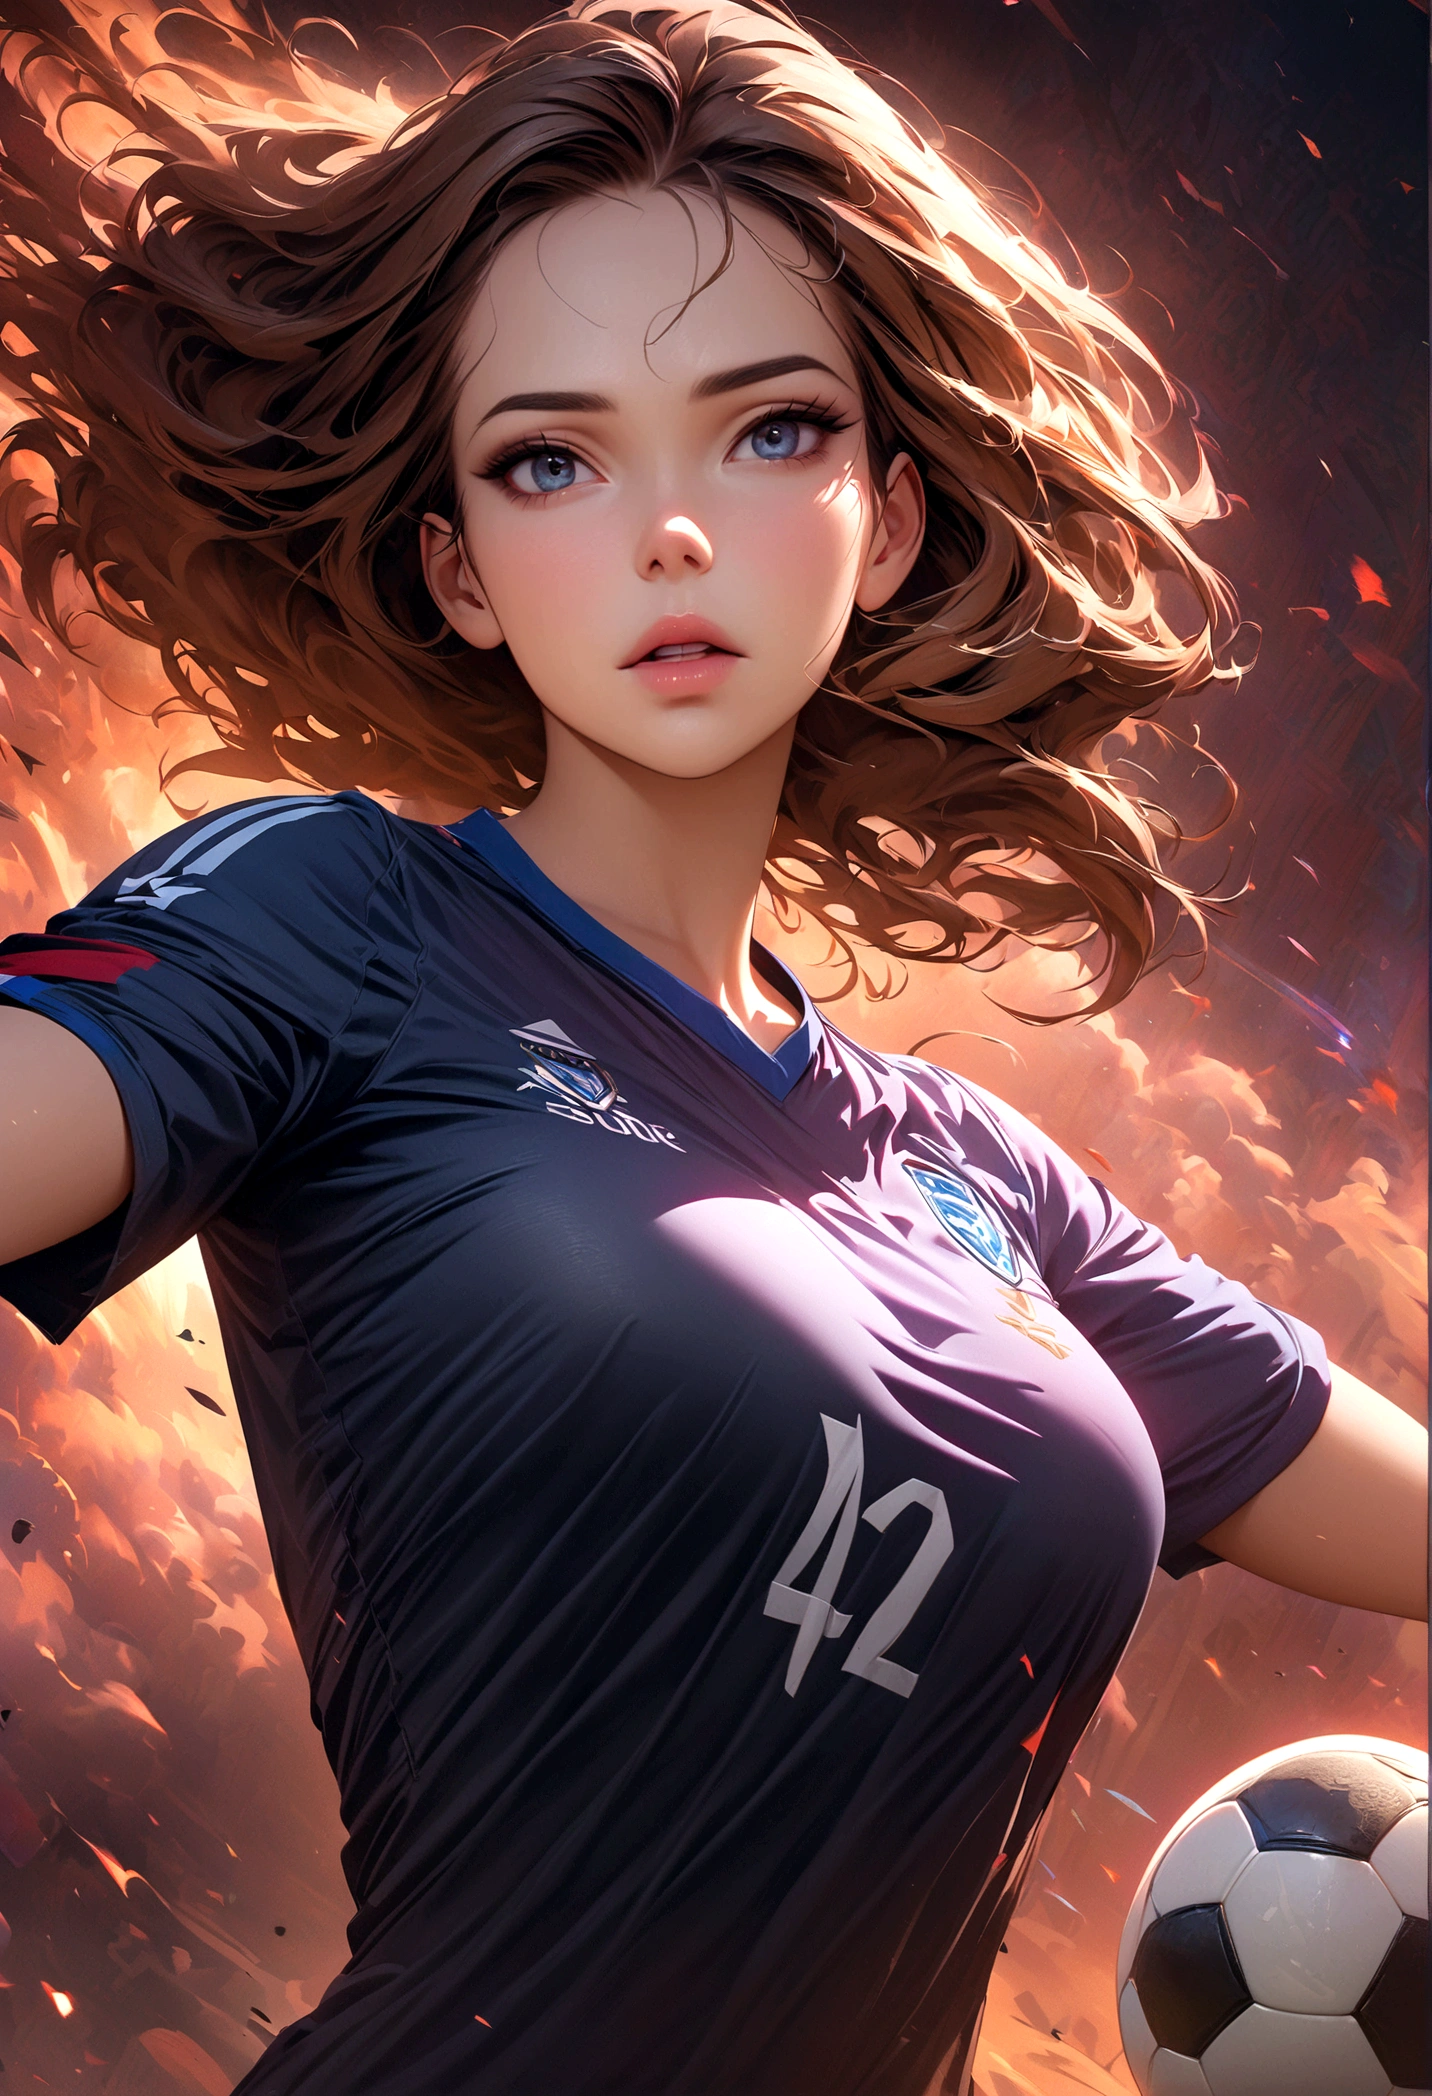 ((Masterpiece, top quality, high resolution)), ((highly detailed CG unified 8K wallpaper)), (huge stunning goddess shot, very hot and sexy, jaw-dropping beauty, perfect proportions, beautiful body, slim body beauty:1.1), soccer players in action on a soccer field during a game, soccer, sports photography, playing soccer, soccer player, sport game, sport photography, shutterstock, football, the best ever, attacking, cover shot, interrupting the big game, football player, professional sports style, trending dribble, best on adobe stock, by Wayne England, action shot, dynamic action shot, 